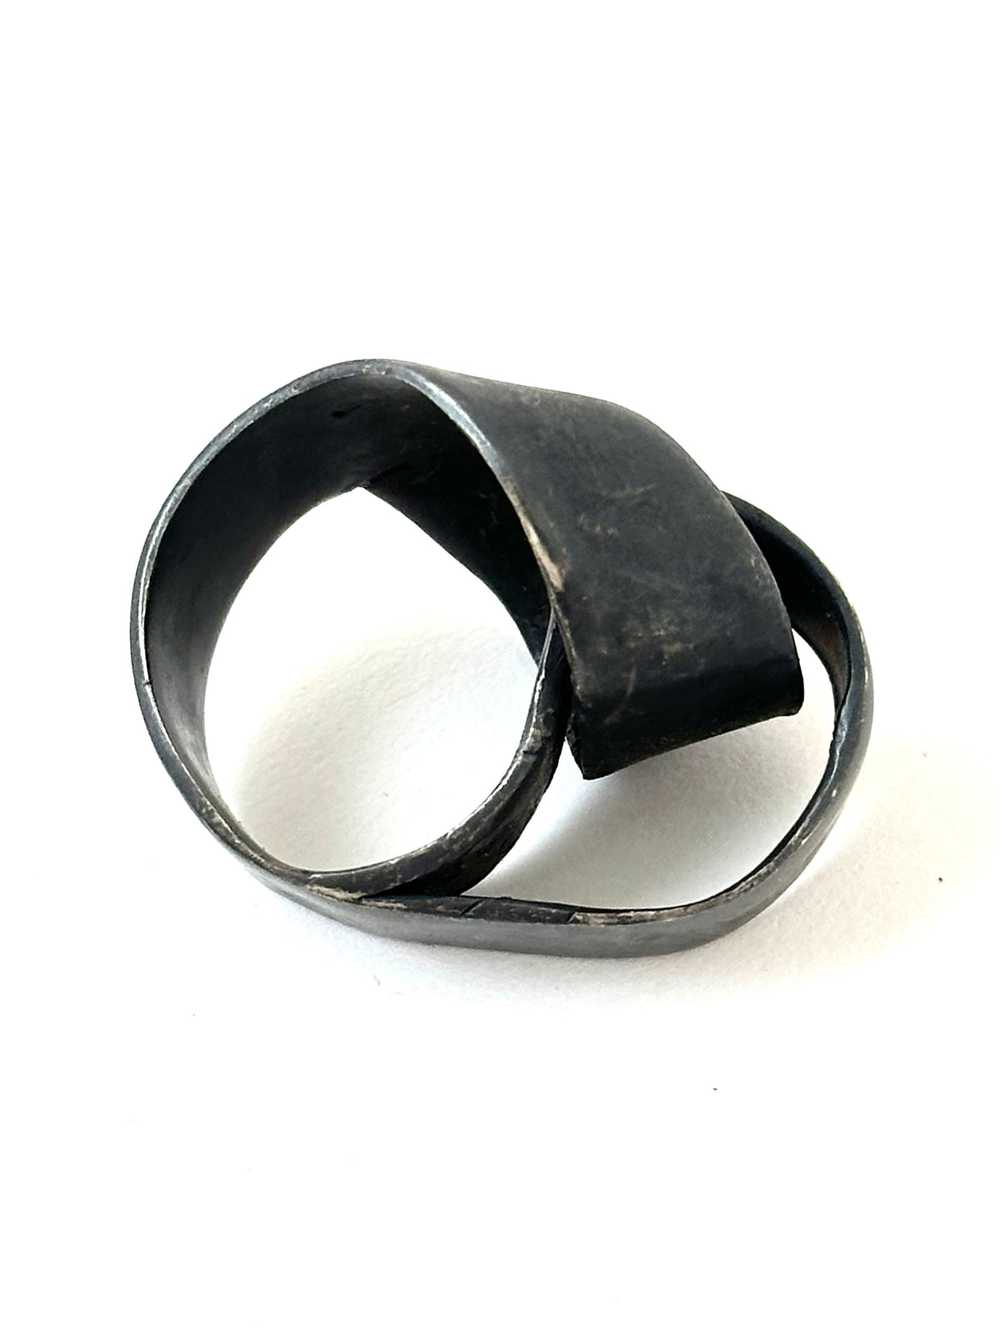 Oxidized Silver Sculpture Ring - image 3